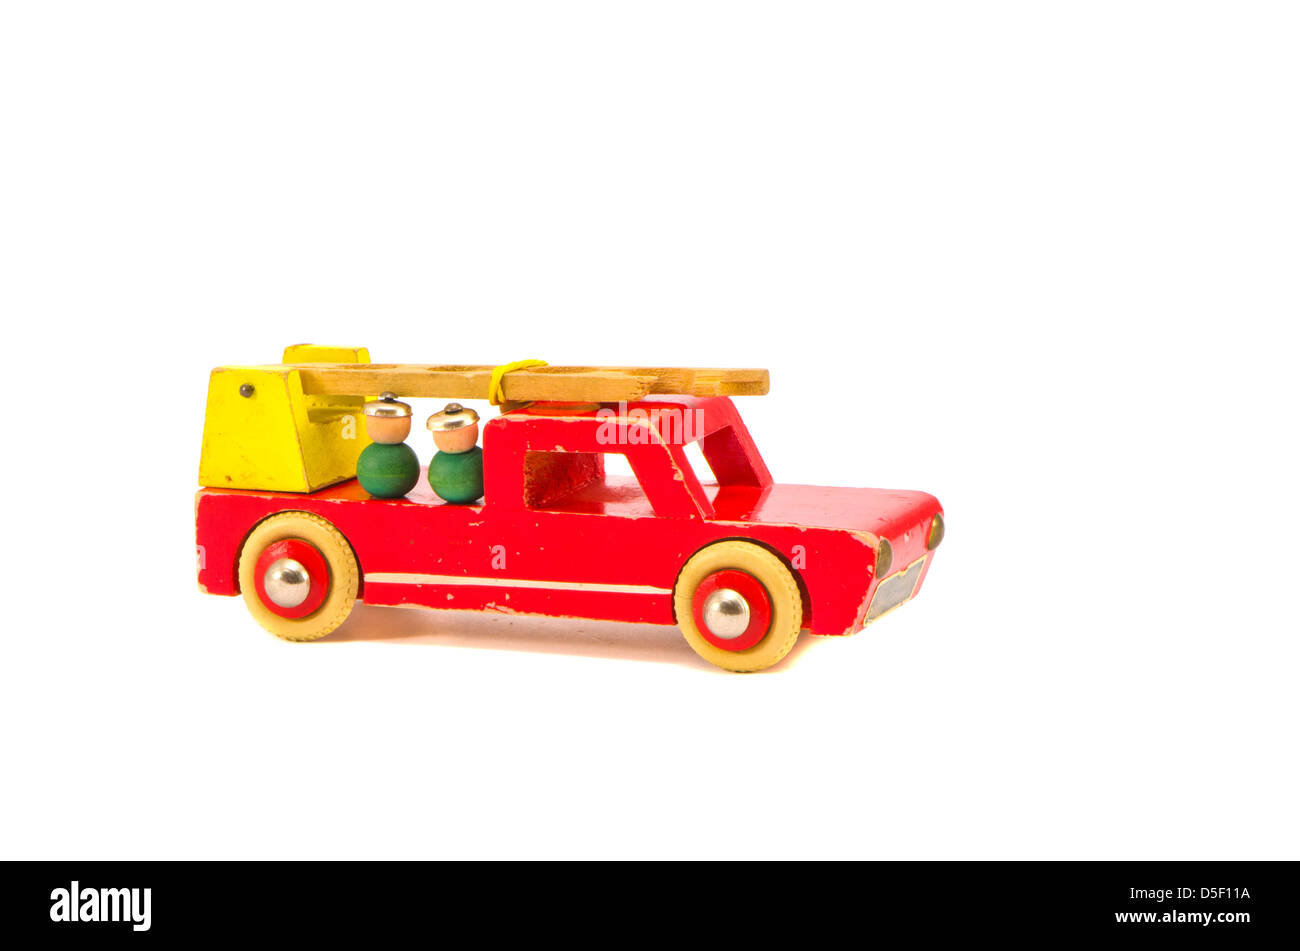 isolated on white background fire-engine wooden toy Stock Photo